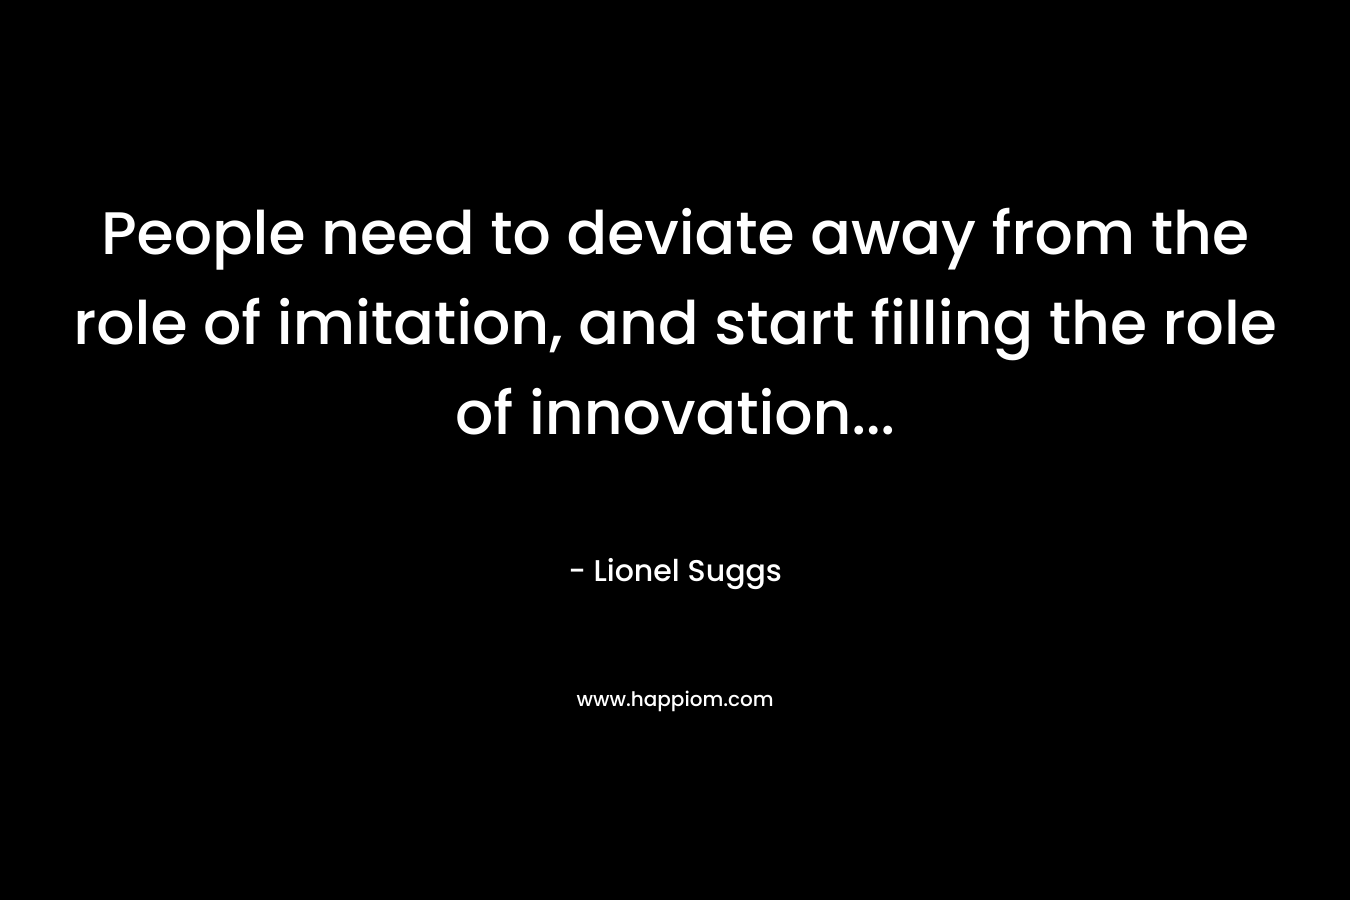 People need to deviate away from the role of imitation, and start filling the role of innovation...